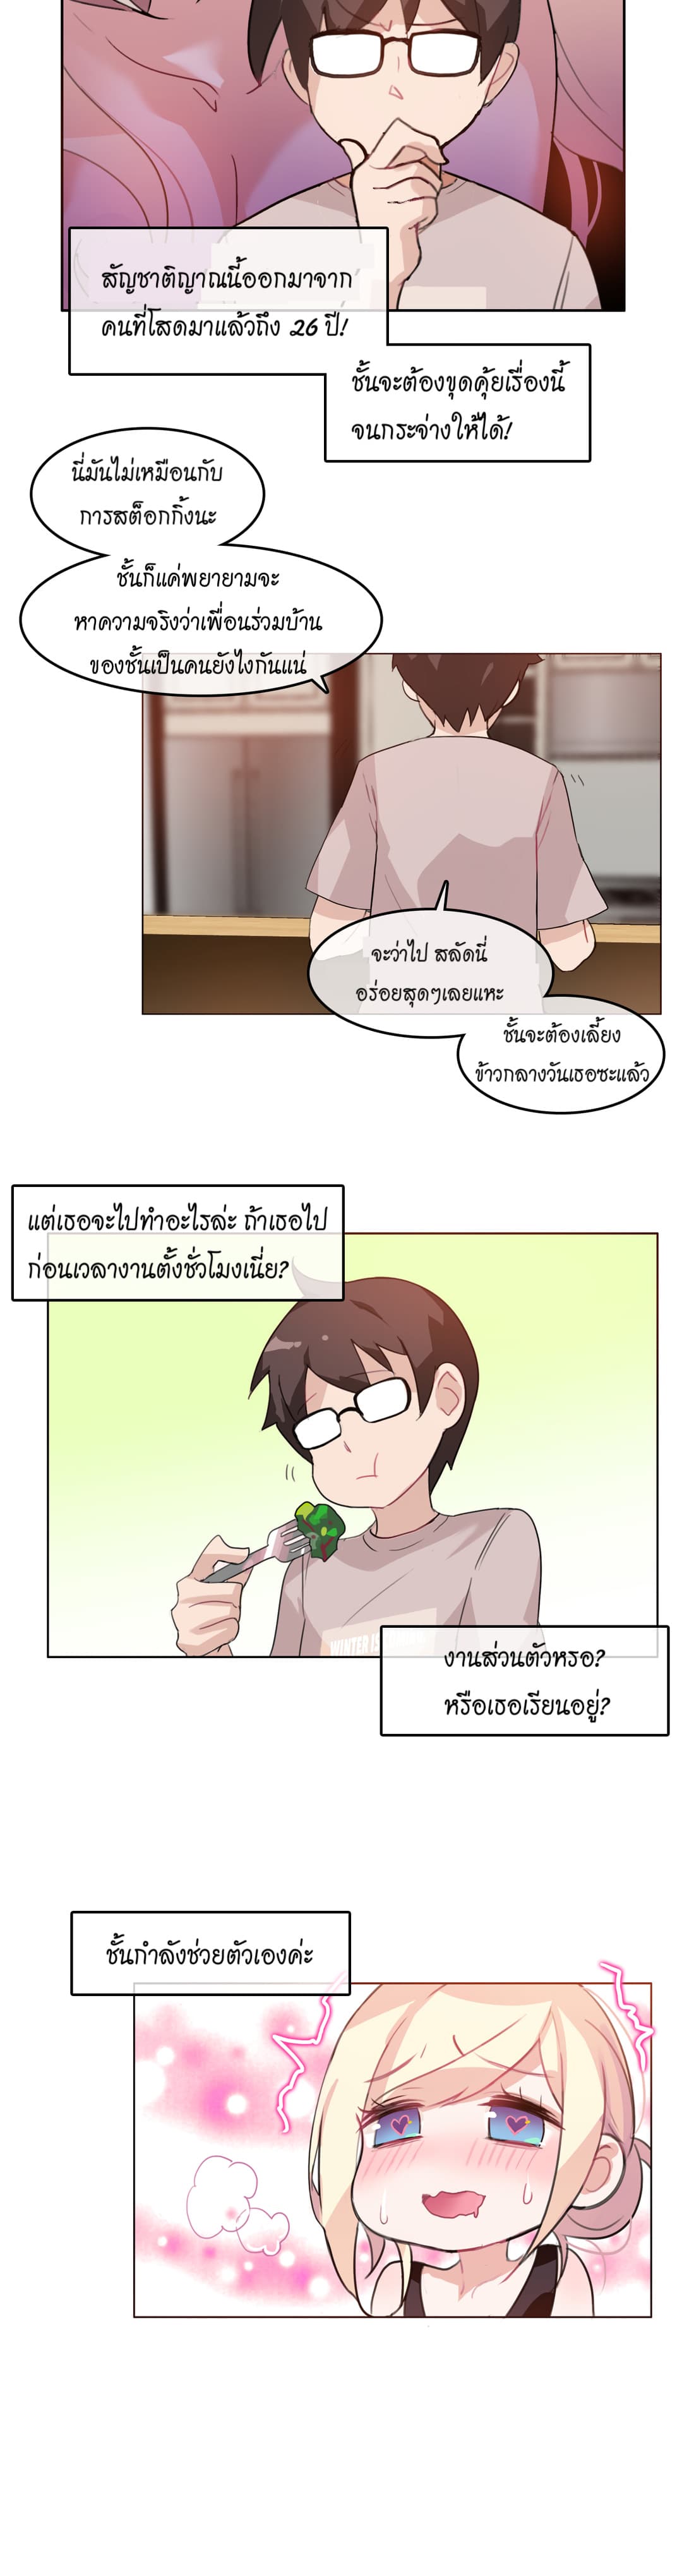 A Pervert’s Daily Life 5 (3)